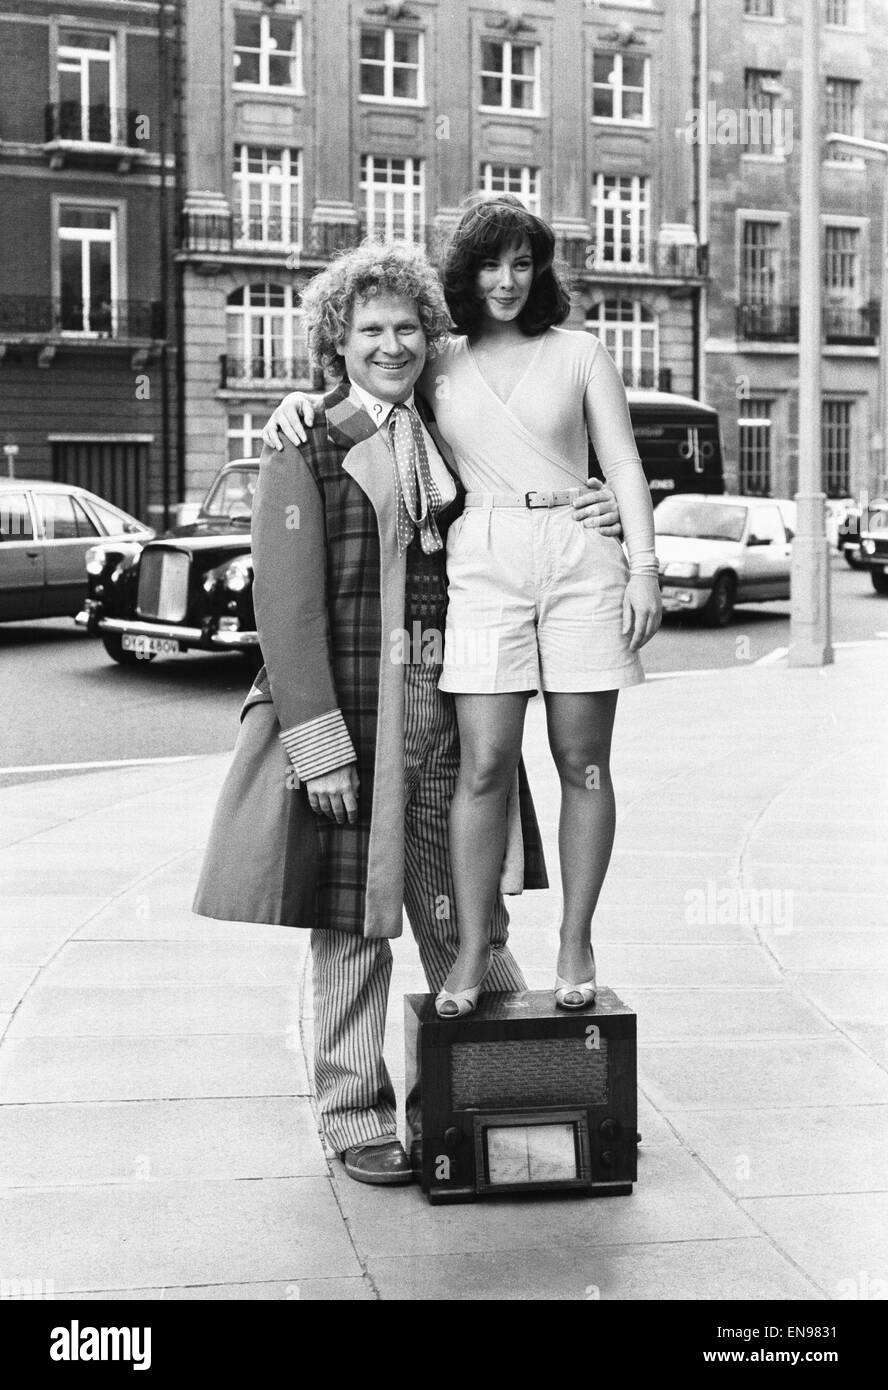 Actor Colin Baker, who plays Doctor Who in the BBC science fiction programme, photographed with his assistant Nicola Bryant who plays Perpugilliam "Peri" Brown outside BBC's Broadcasting House. They were at the BBC to appear on radio 4 in order to promote Stock Photo